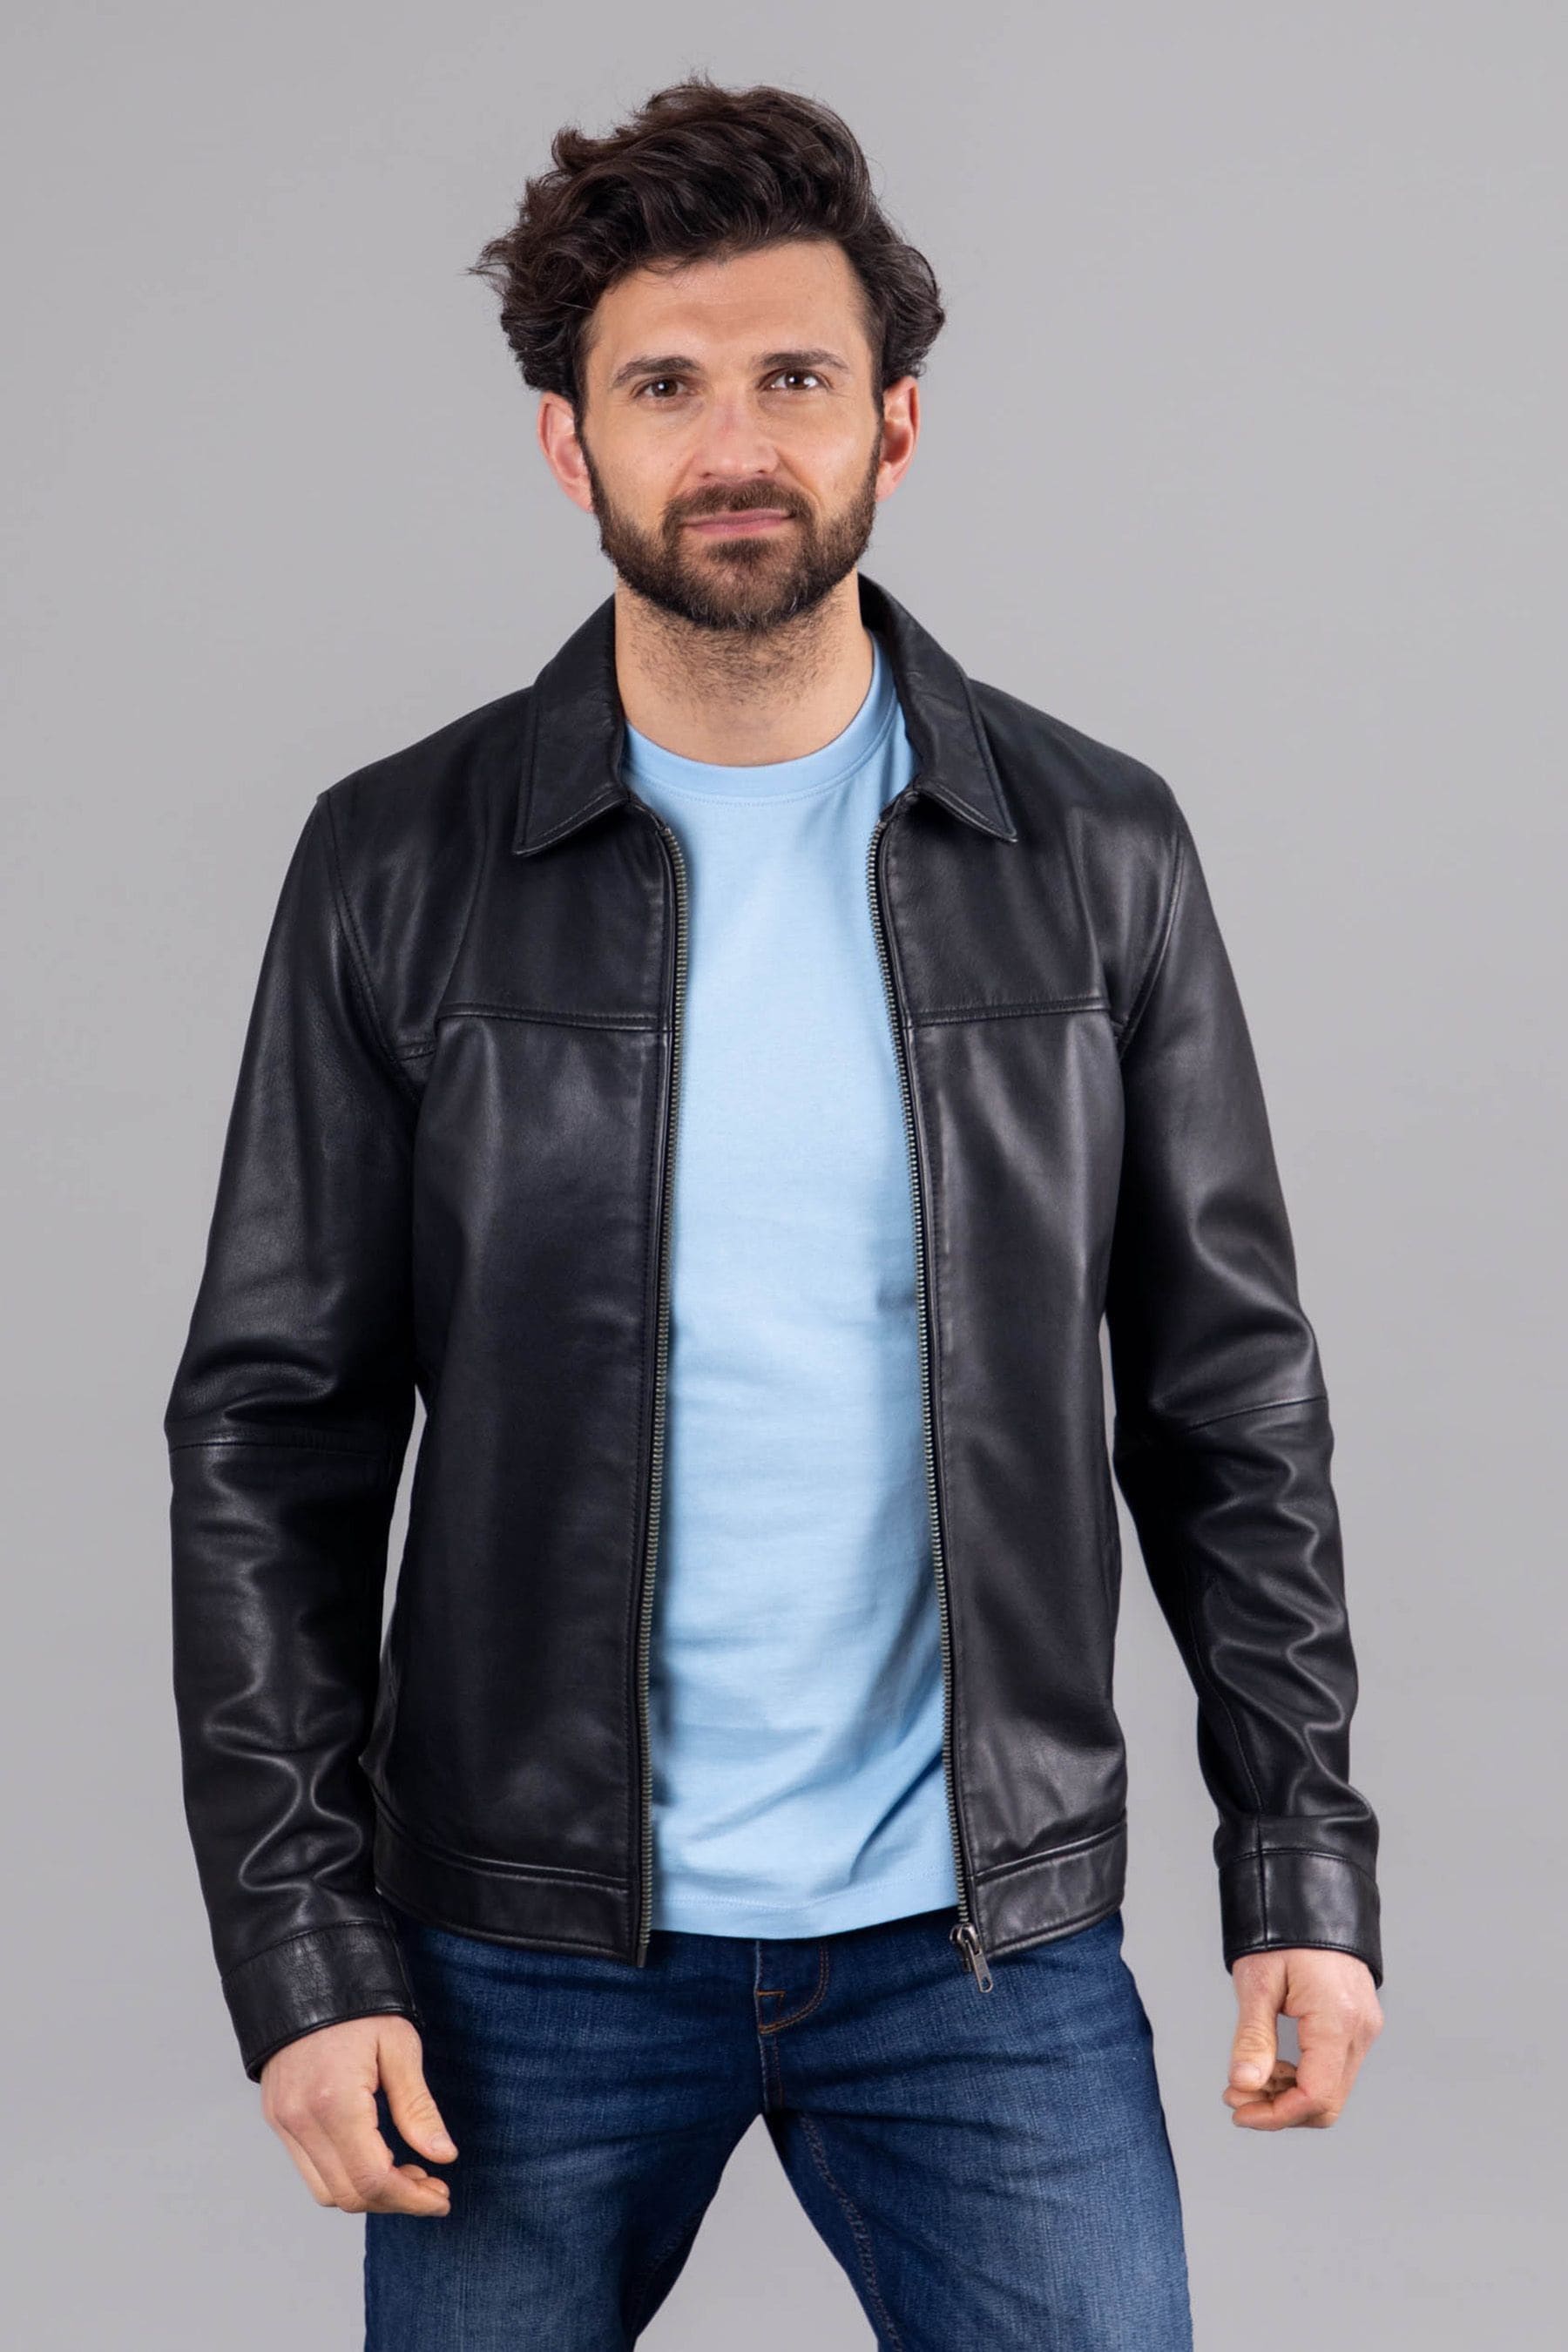 Buy Lakeland Leather Renwick Collared Leather Black Jacket from the ...